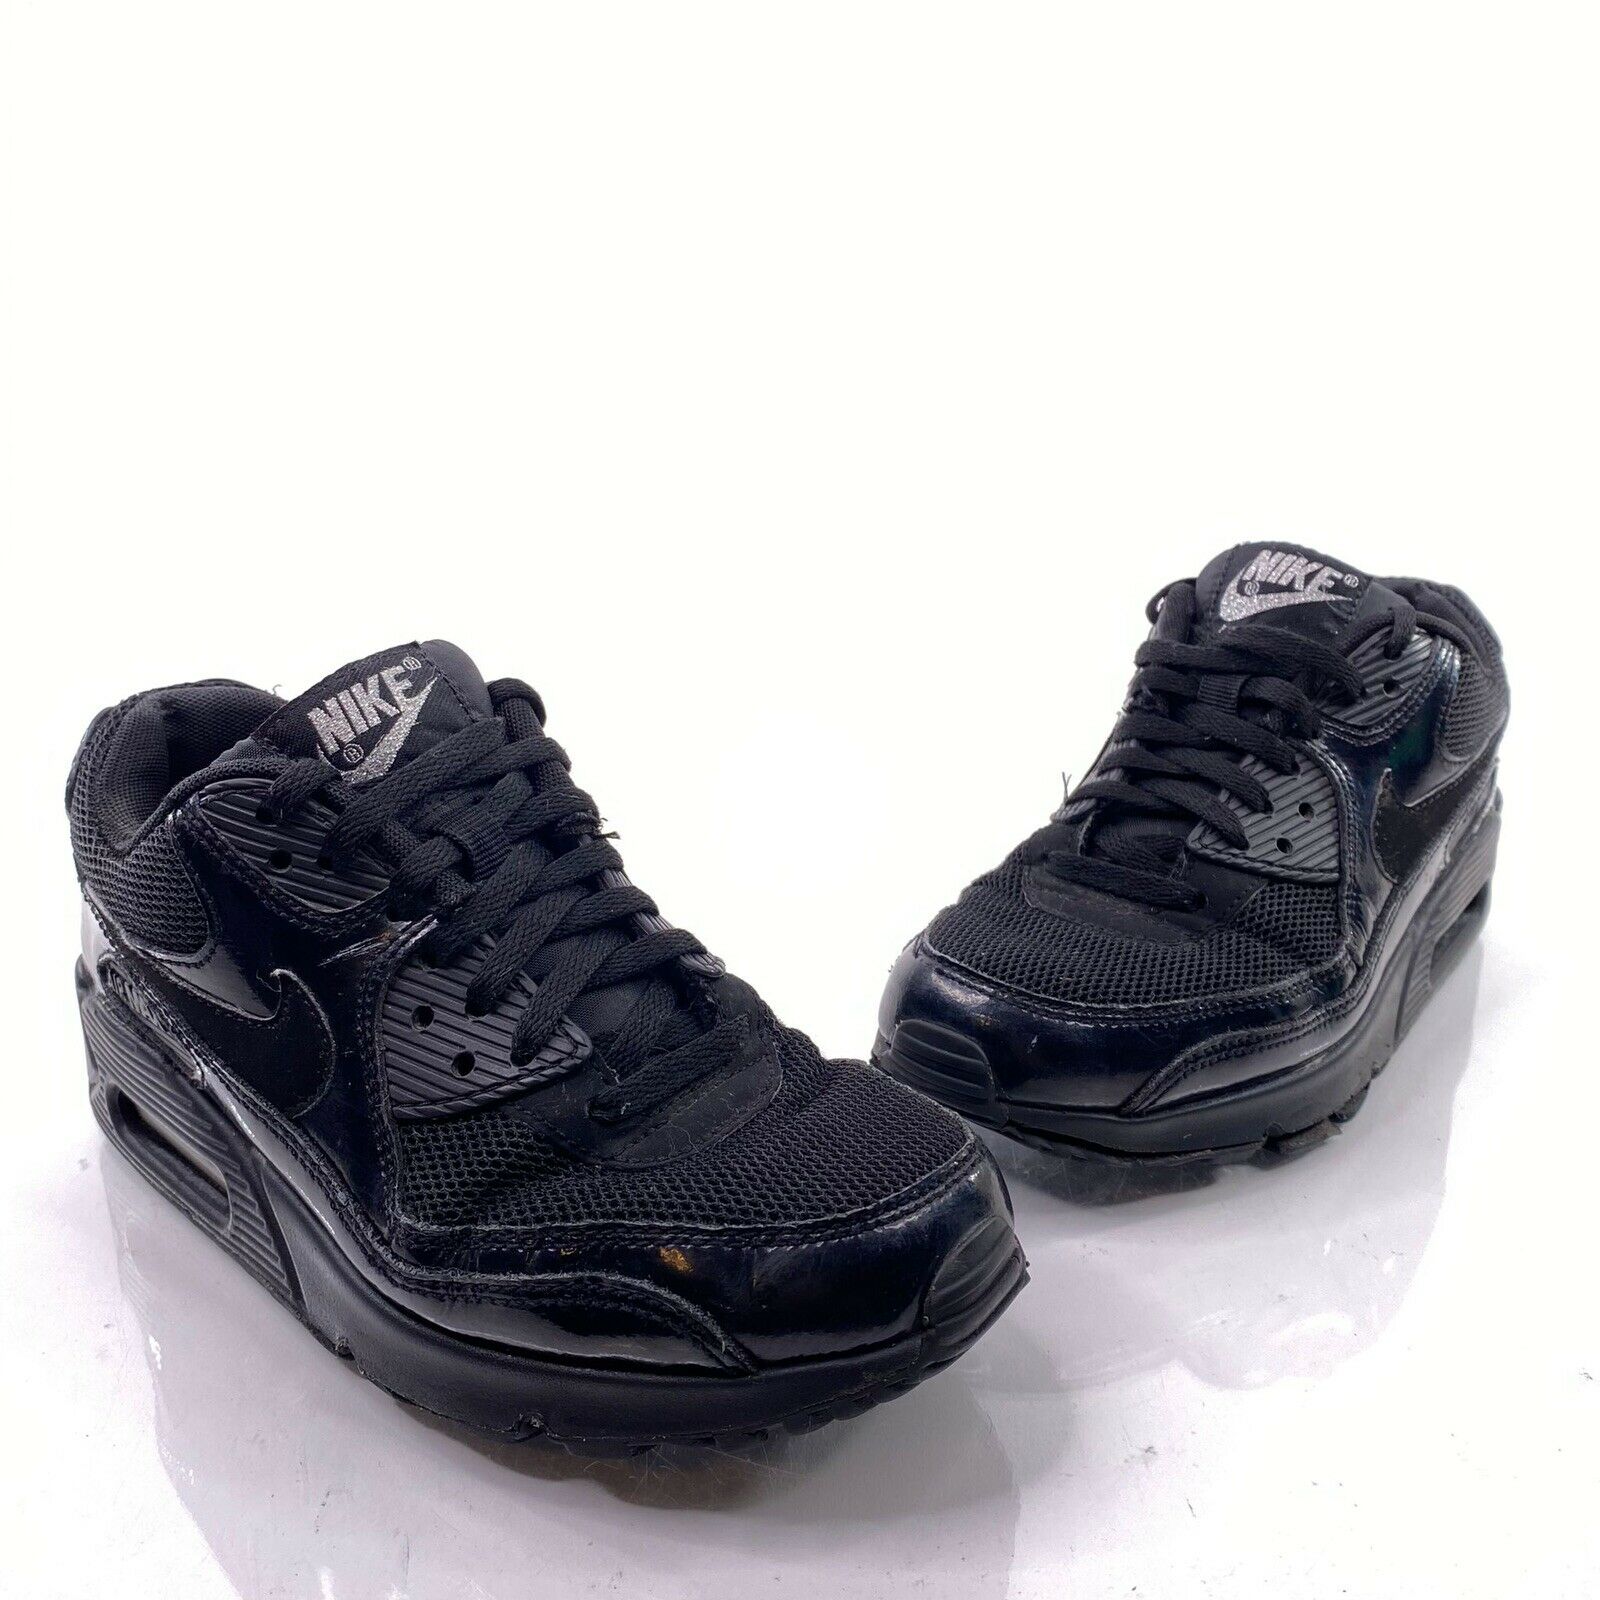 Nike Air Max 90 Premium Women’s Size 5 Black Shoes 443817-002 Patent Leather